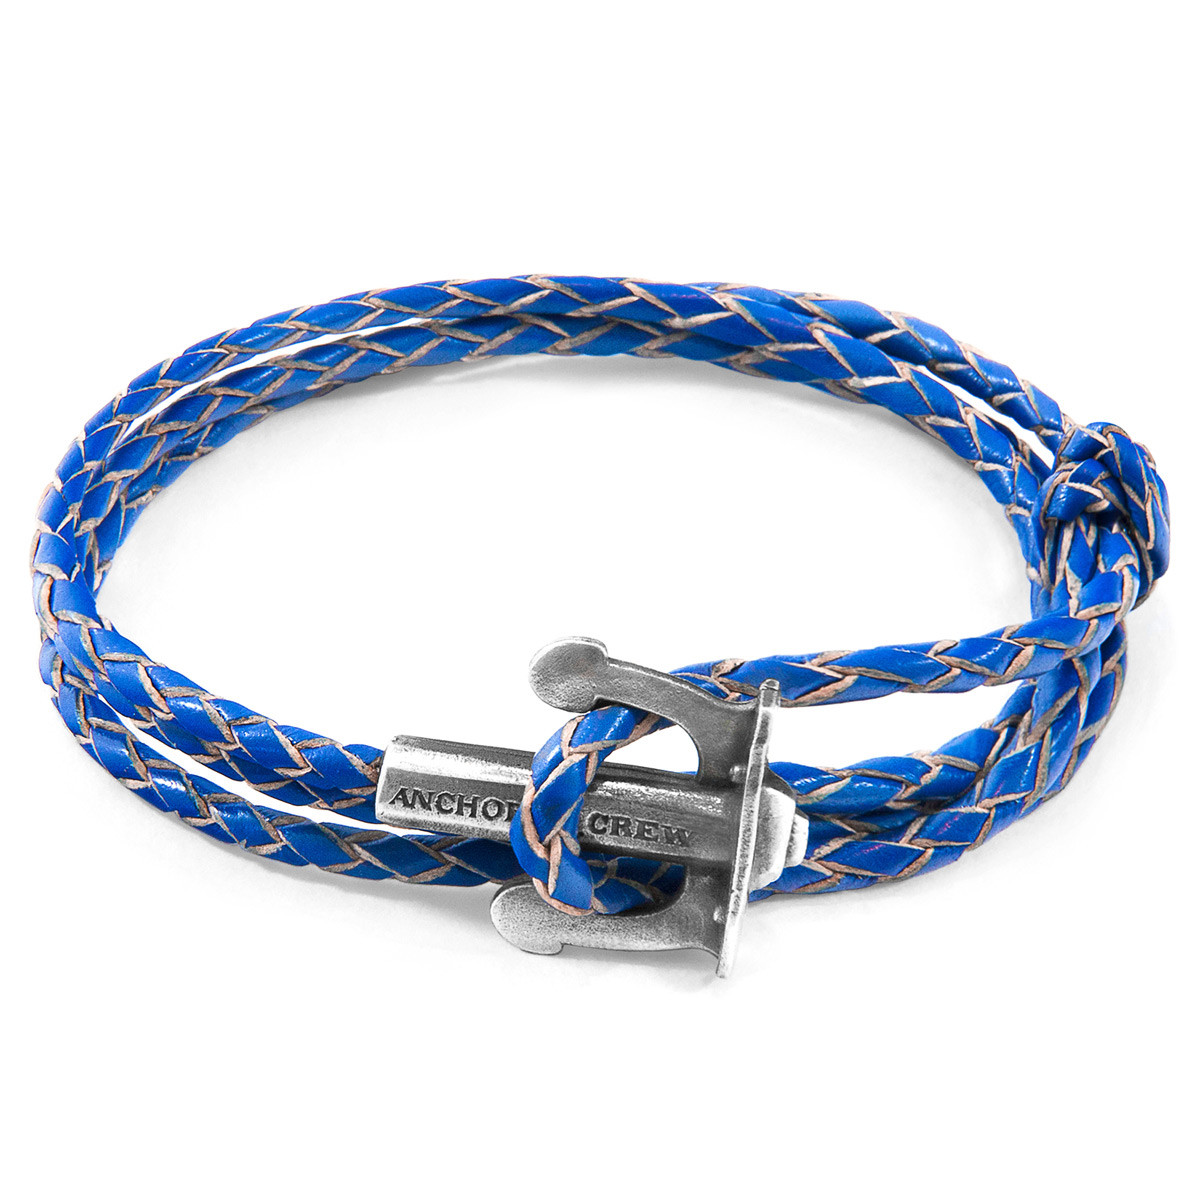 Anchor & Crew Royal Blue Union Anchor Silver and Braided Leather Bracelet